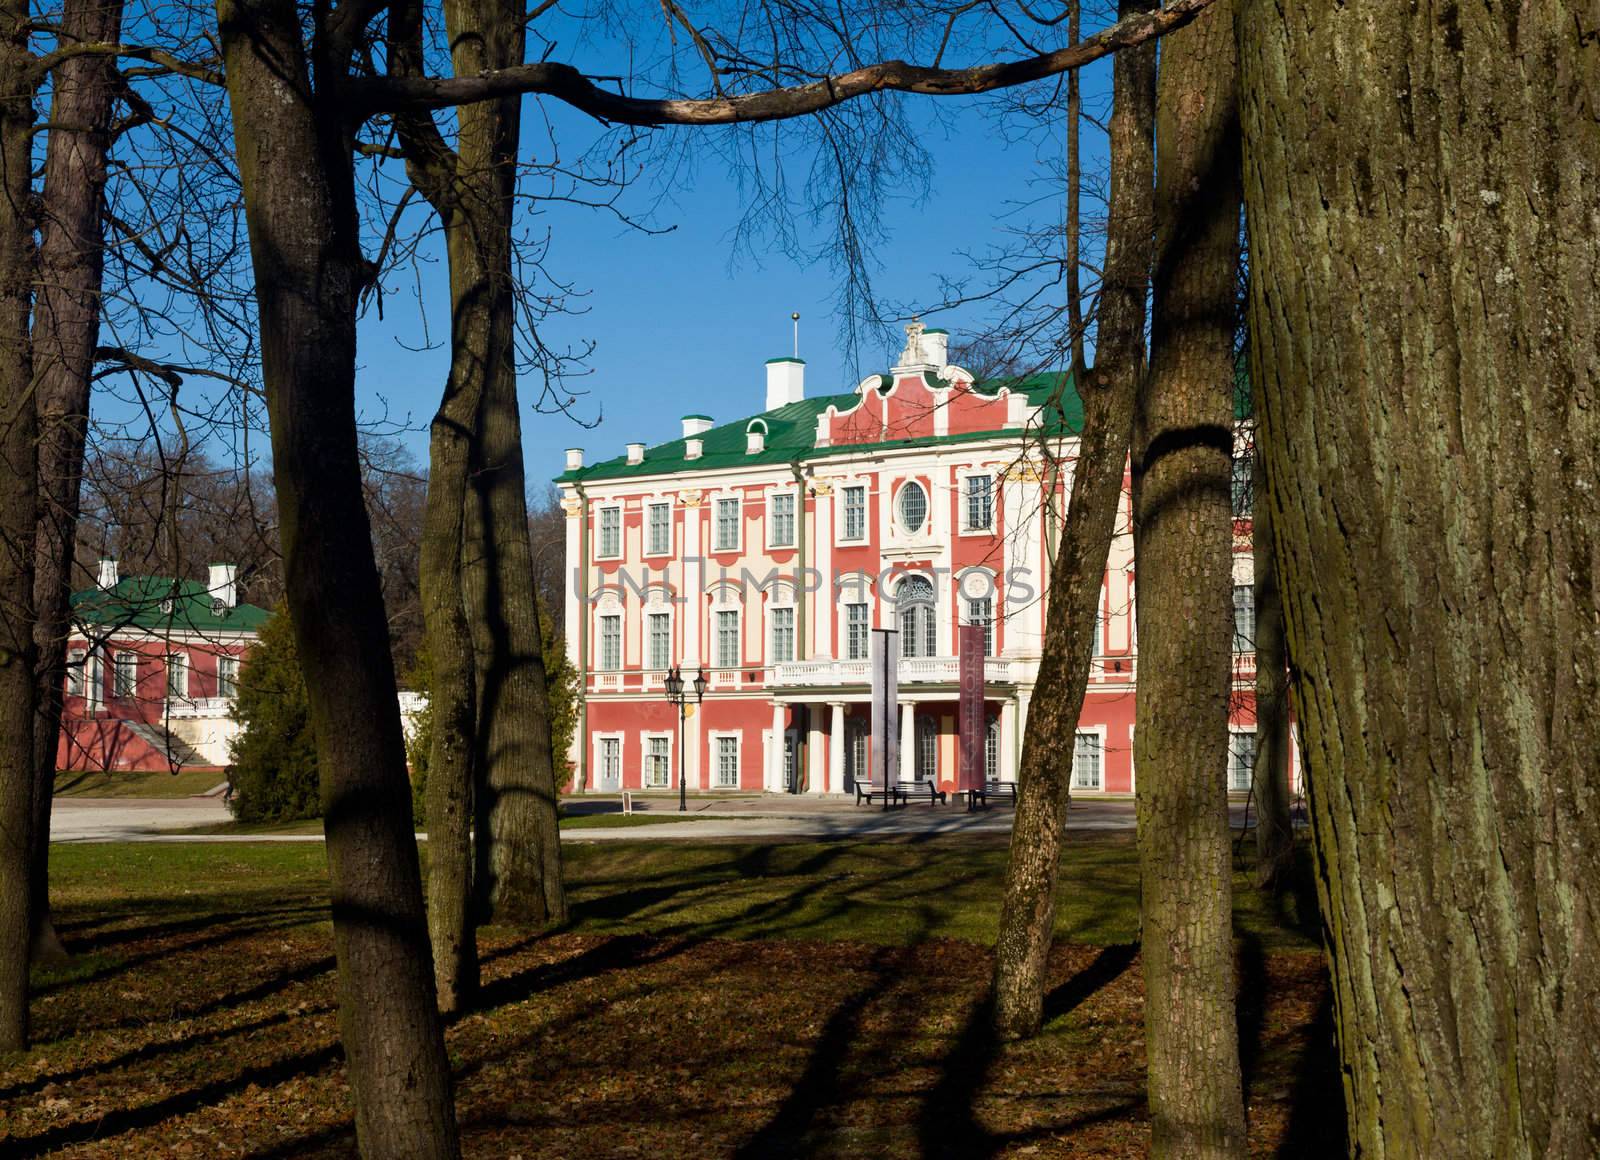 The Kadriorg Palace was built by Tsar Peter the Great in the 18th Century